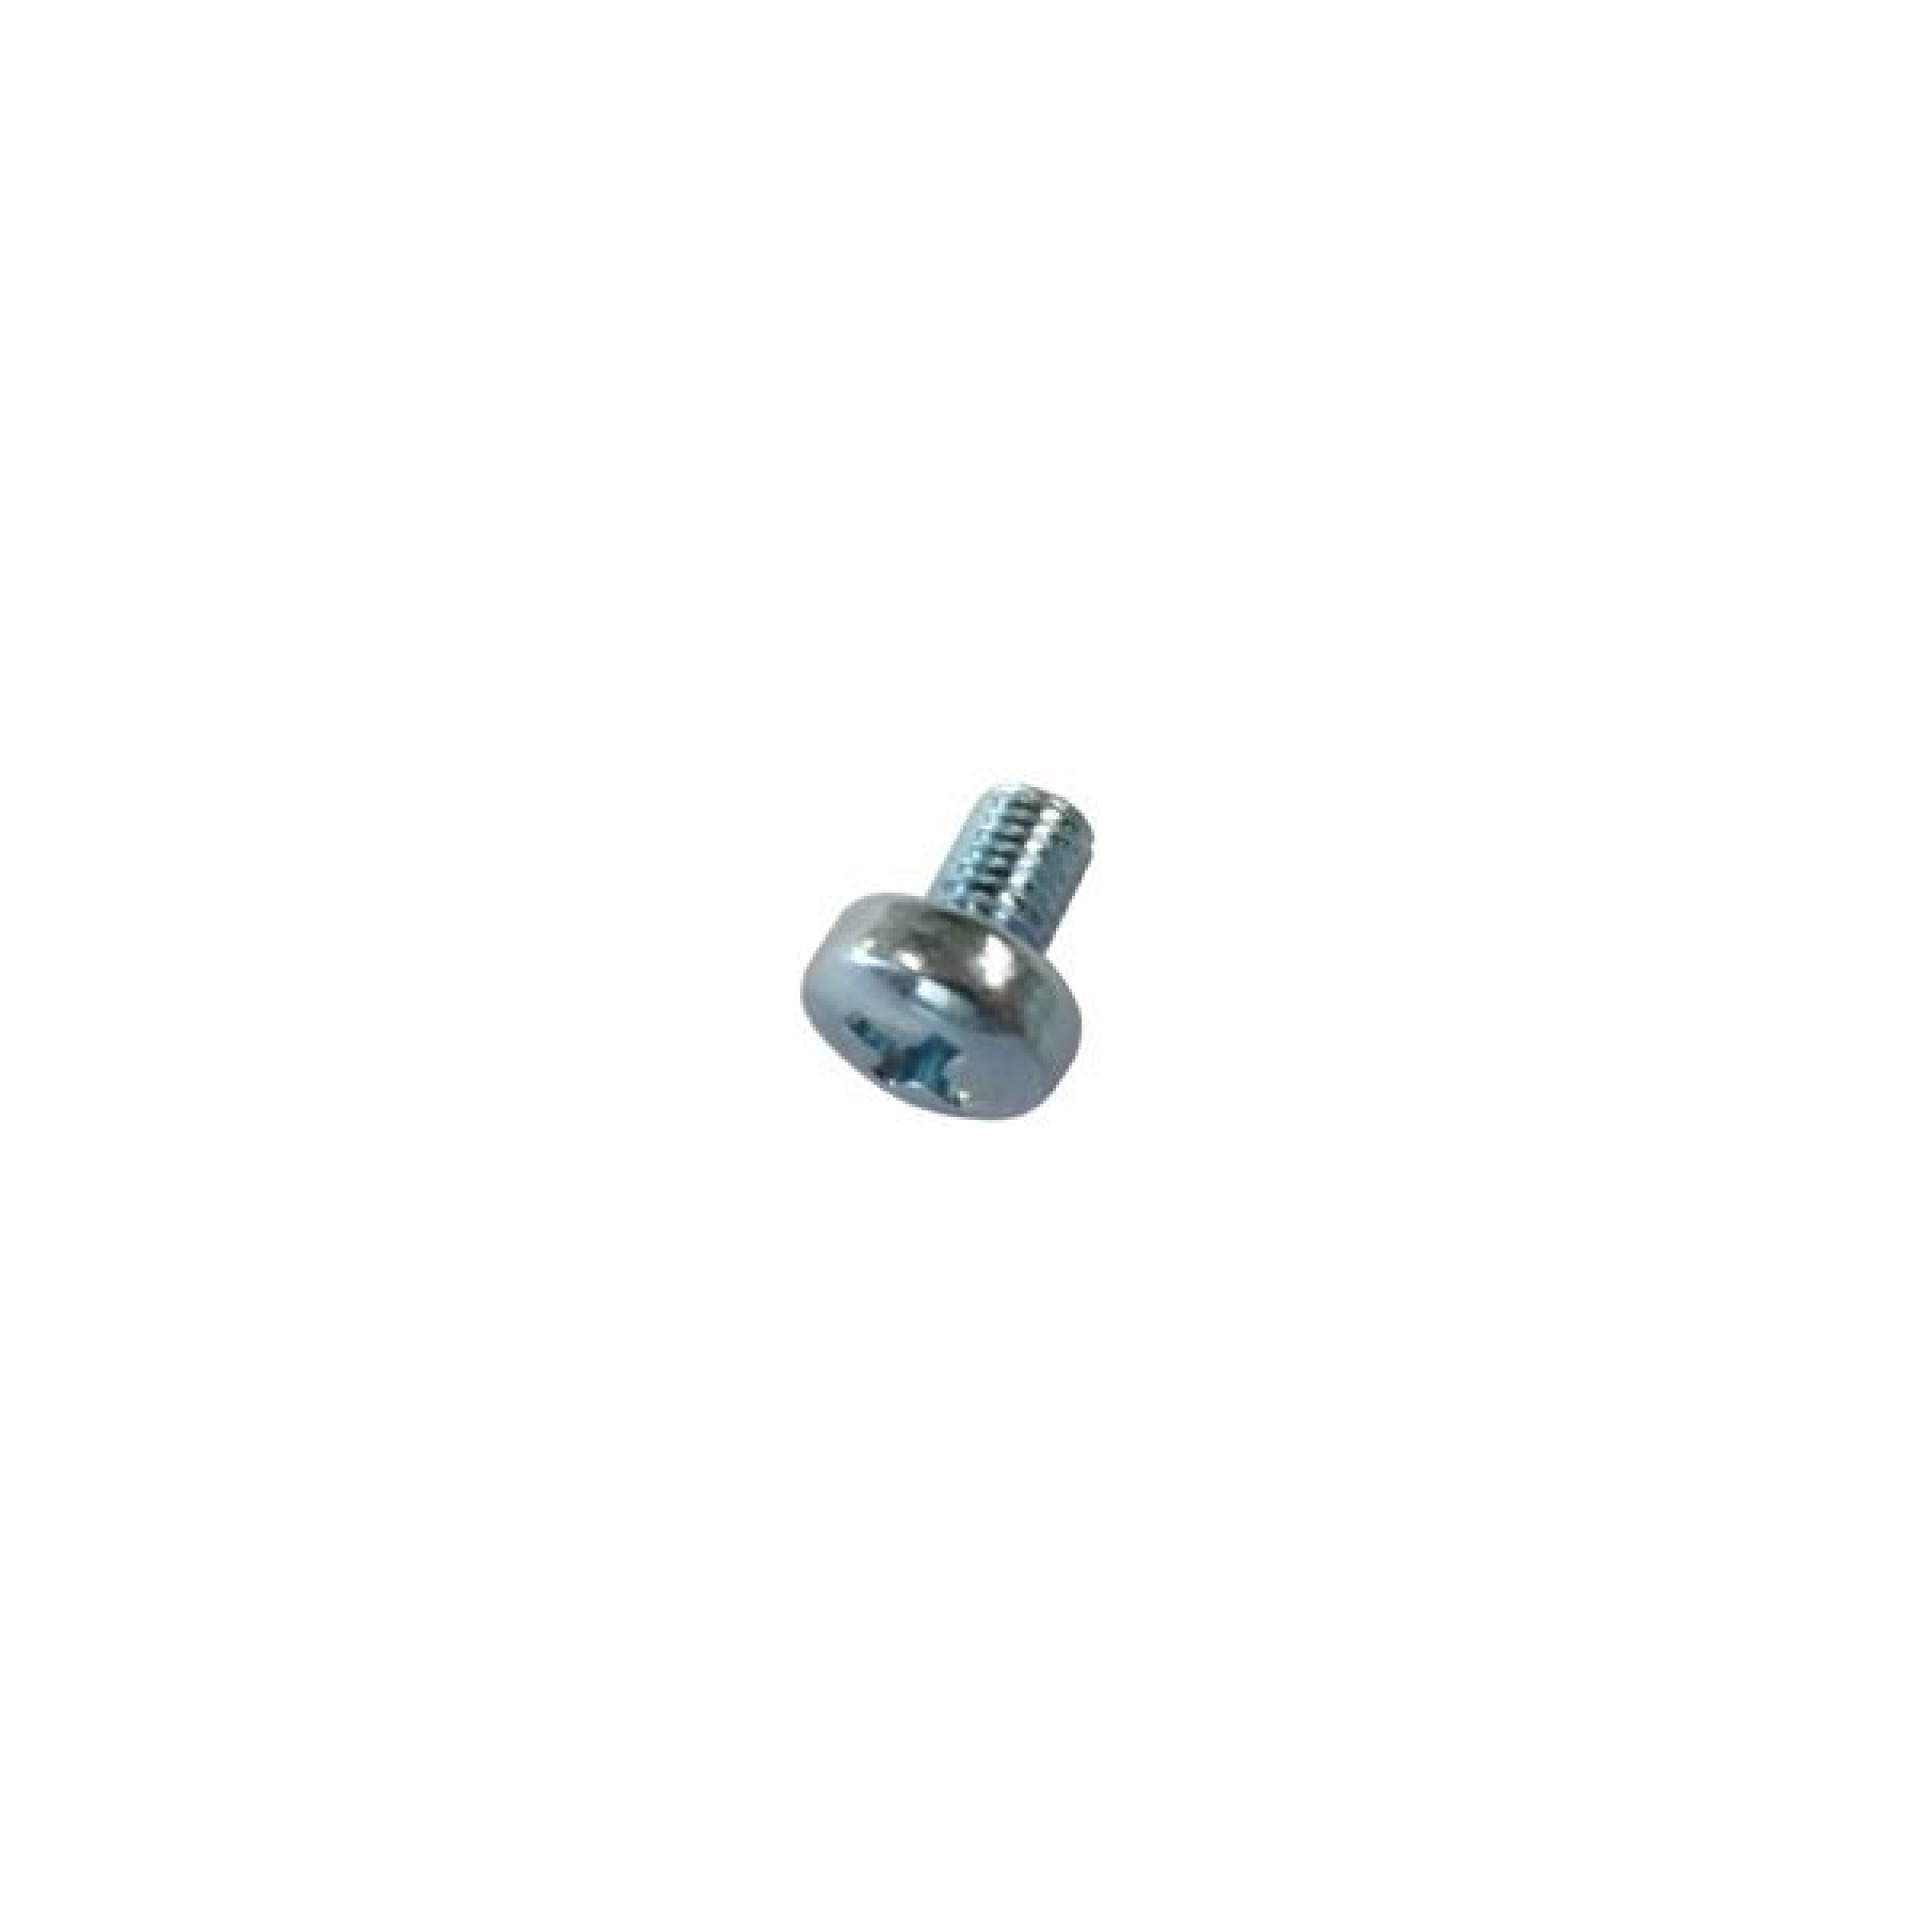 Screw M4 x 8mm for 83030.2 4.8 tinned DIN 7985